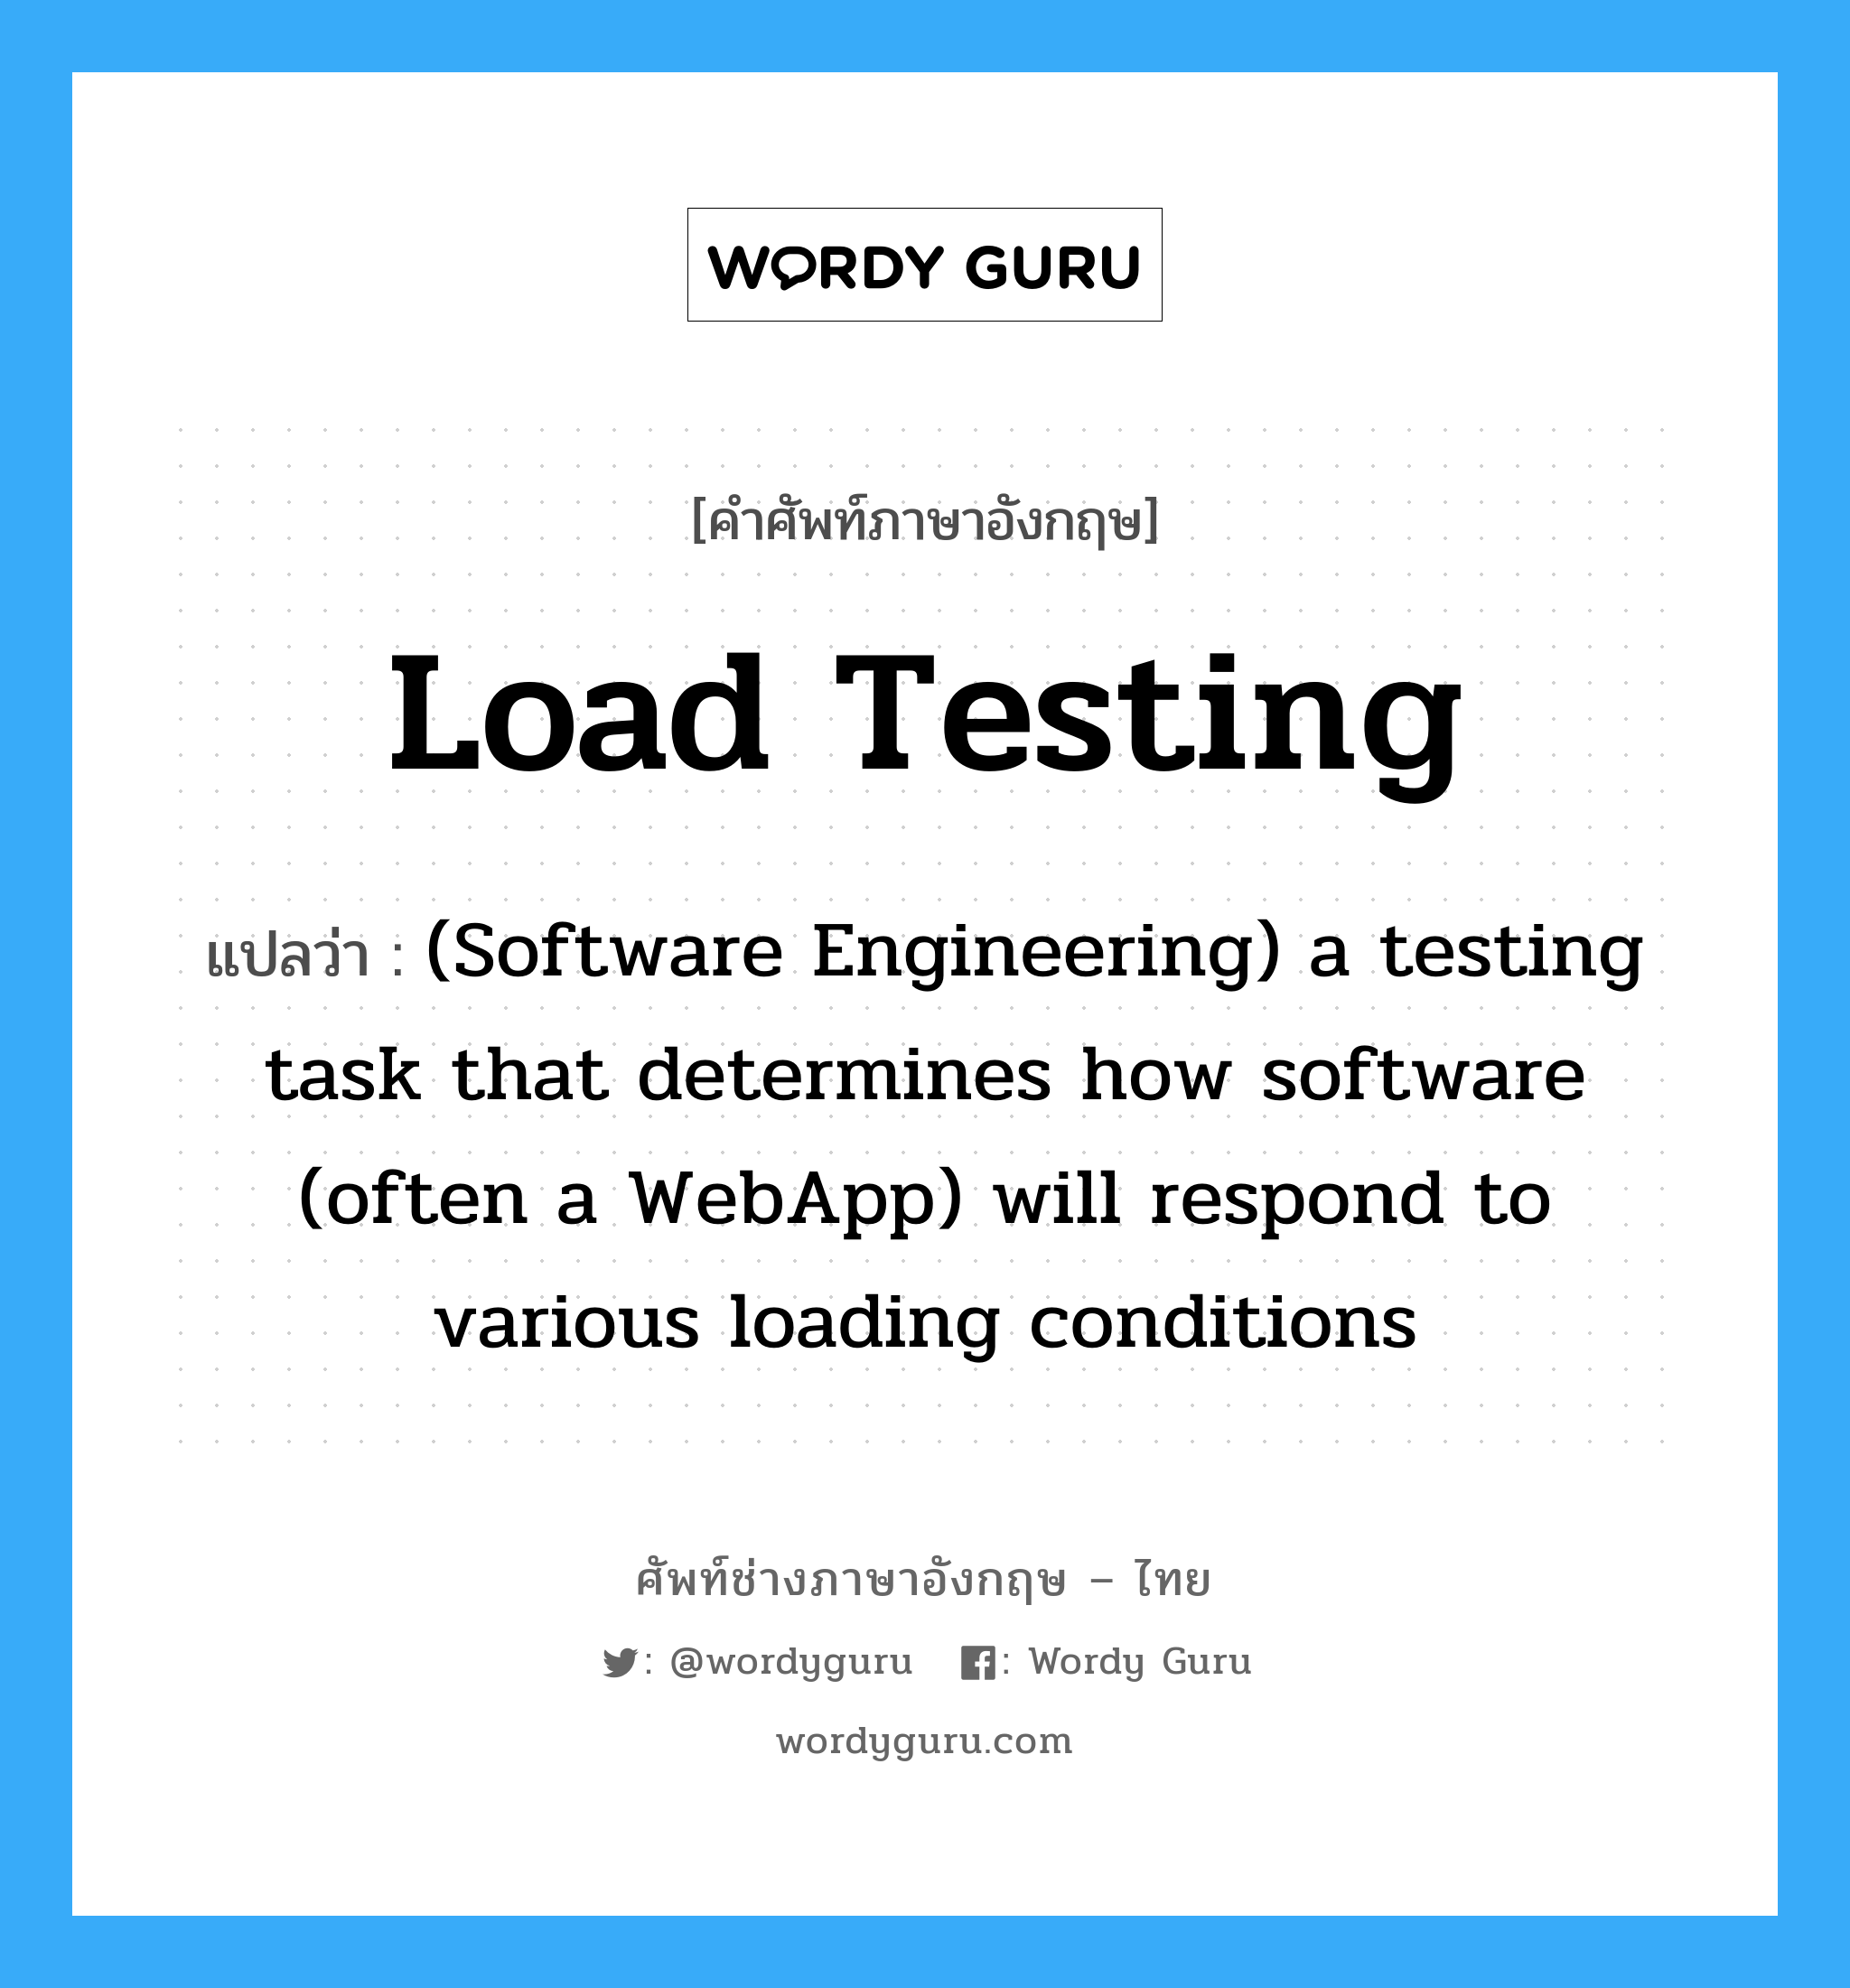 Load testing แปลว่า?, คำศัพท์ช่างภาษาอังกฤษ - ไทย Load testing คำศัพท์ภาษาอังกฤษ Load testing แปลว่า (Software Engineering) a testing task that determines how software (often a WebApp) will respond to various loading conditions